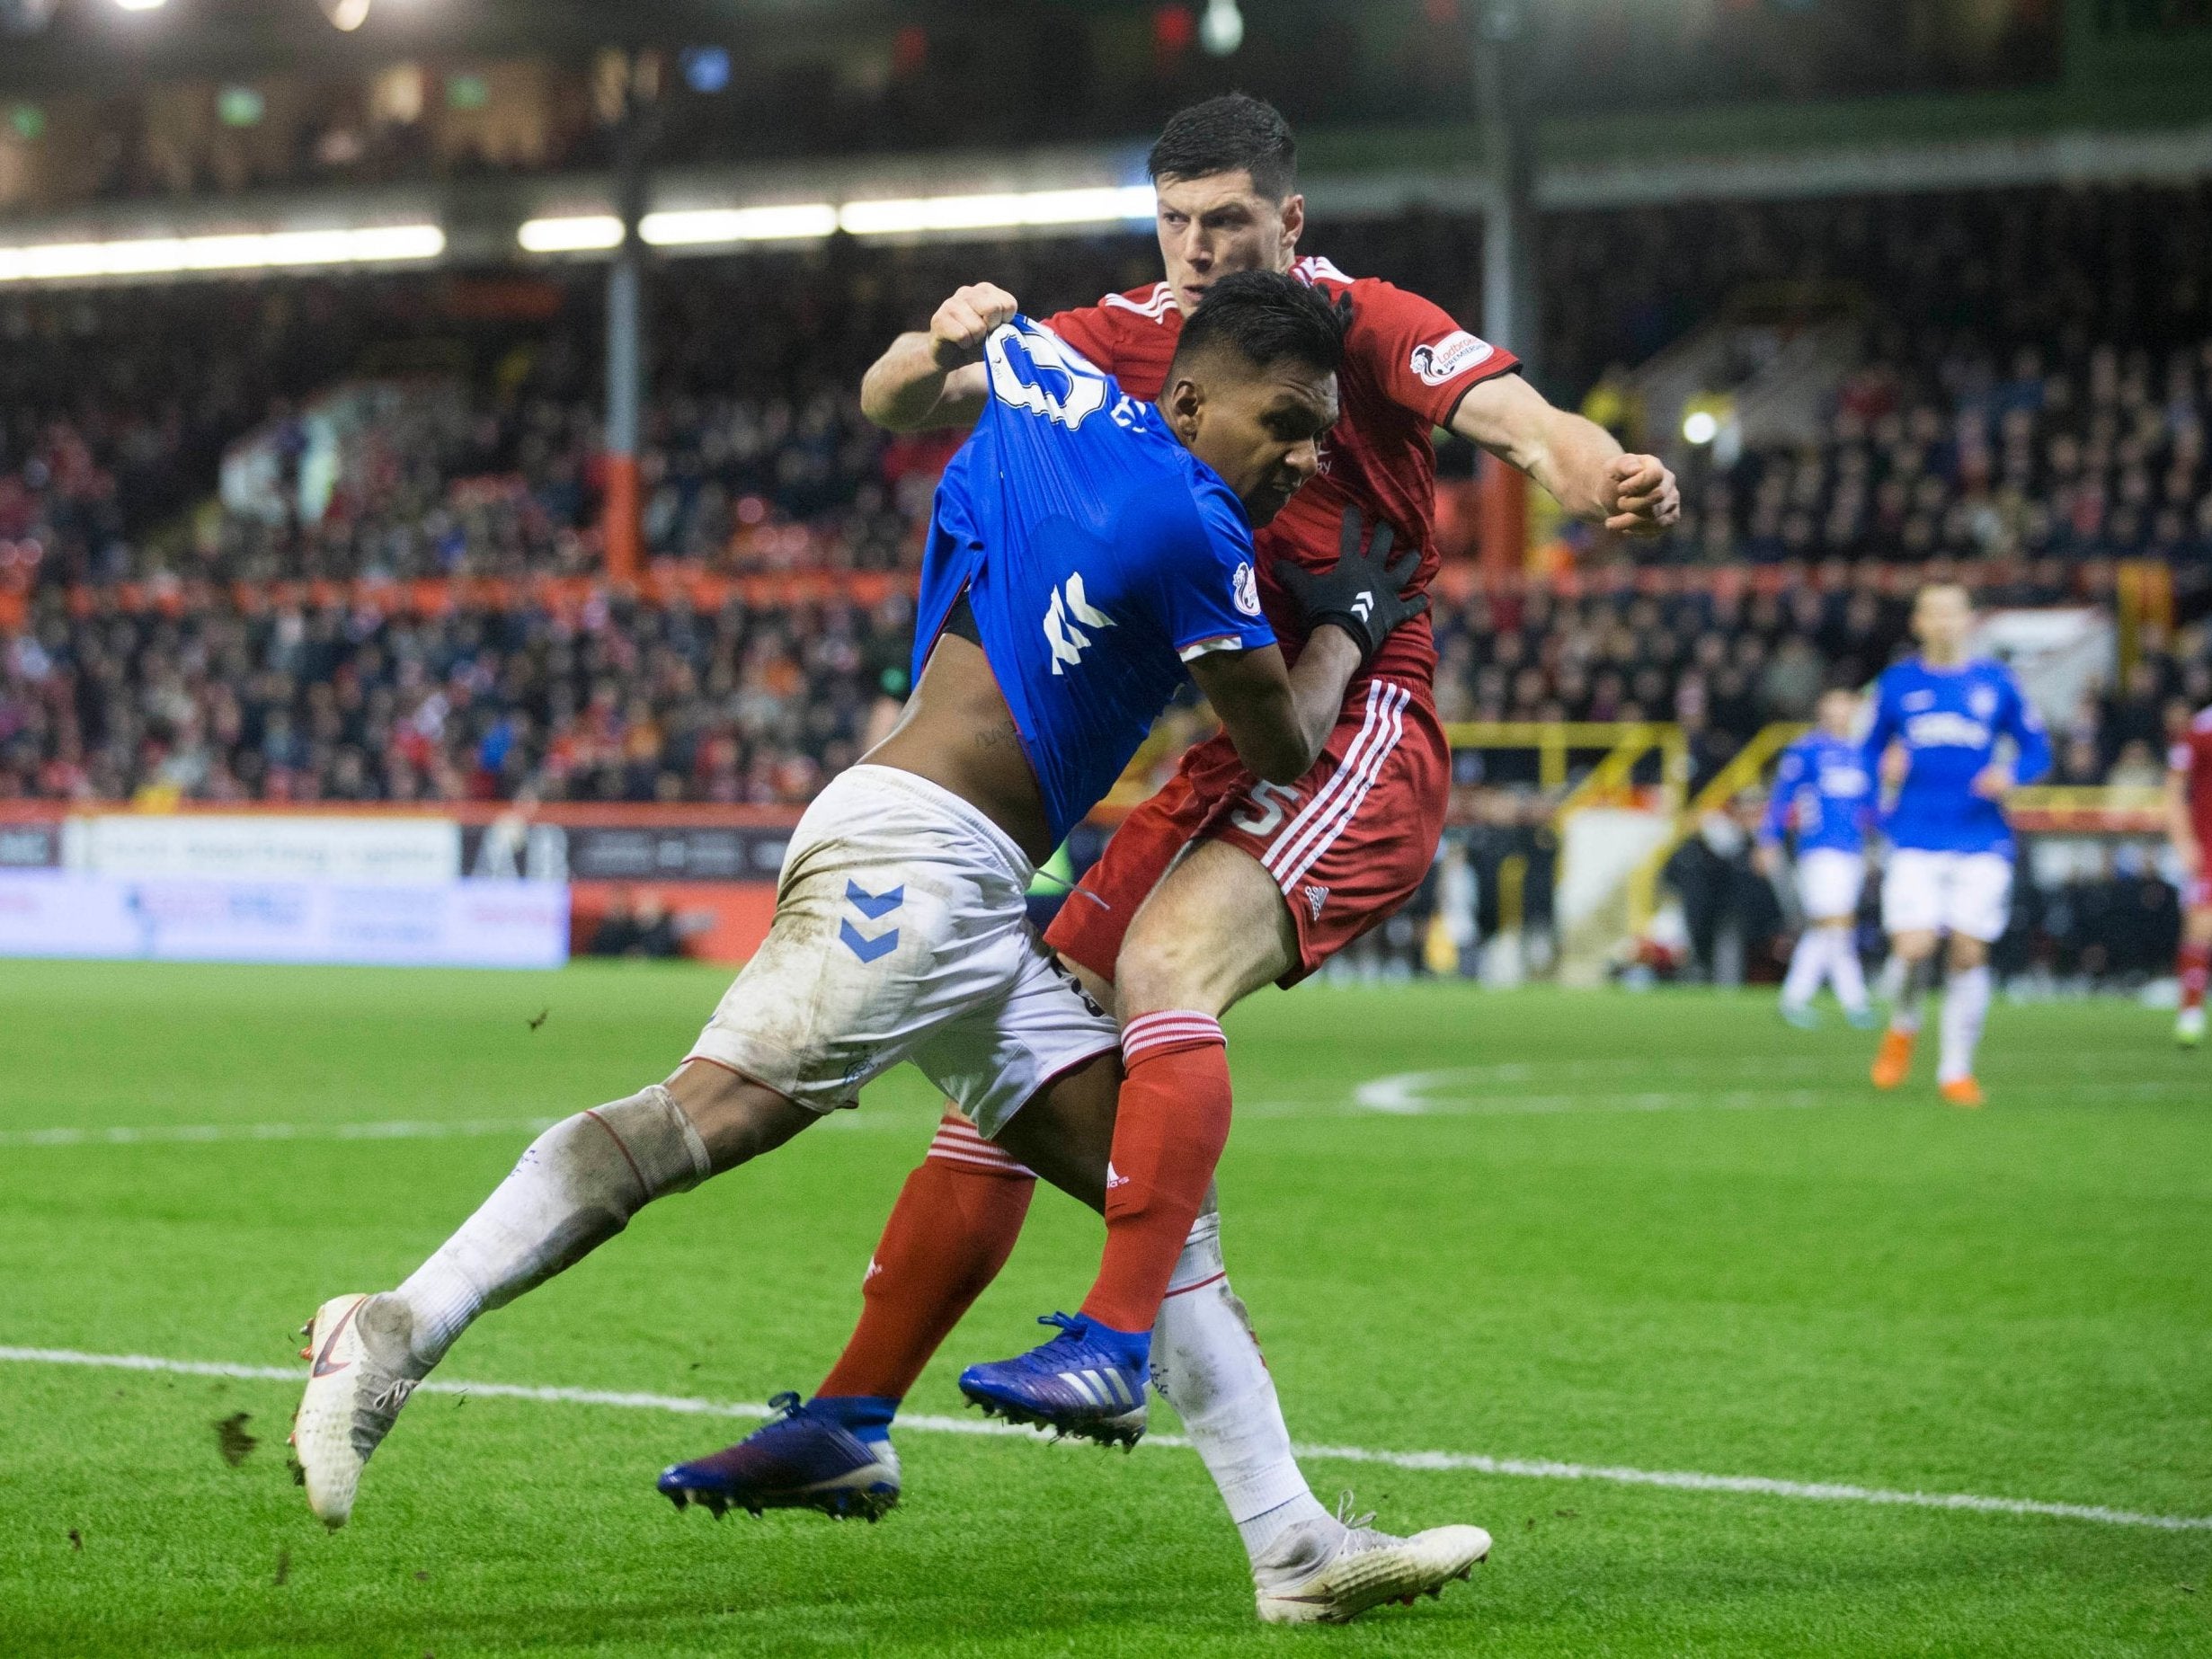 Alfredo Morelos was subject to a section on the BBC's Sportscene in which he was criticised